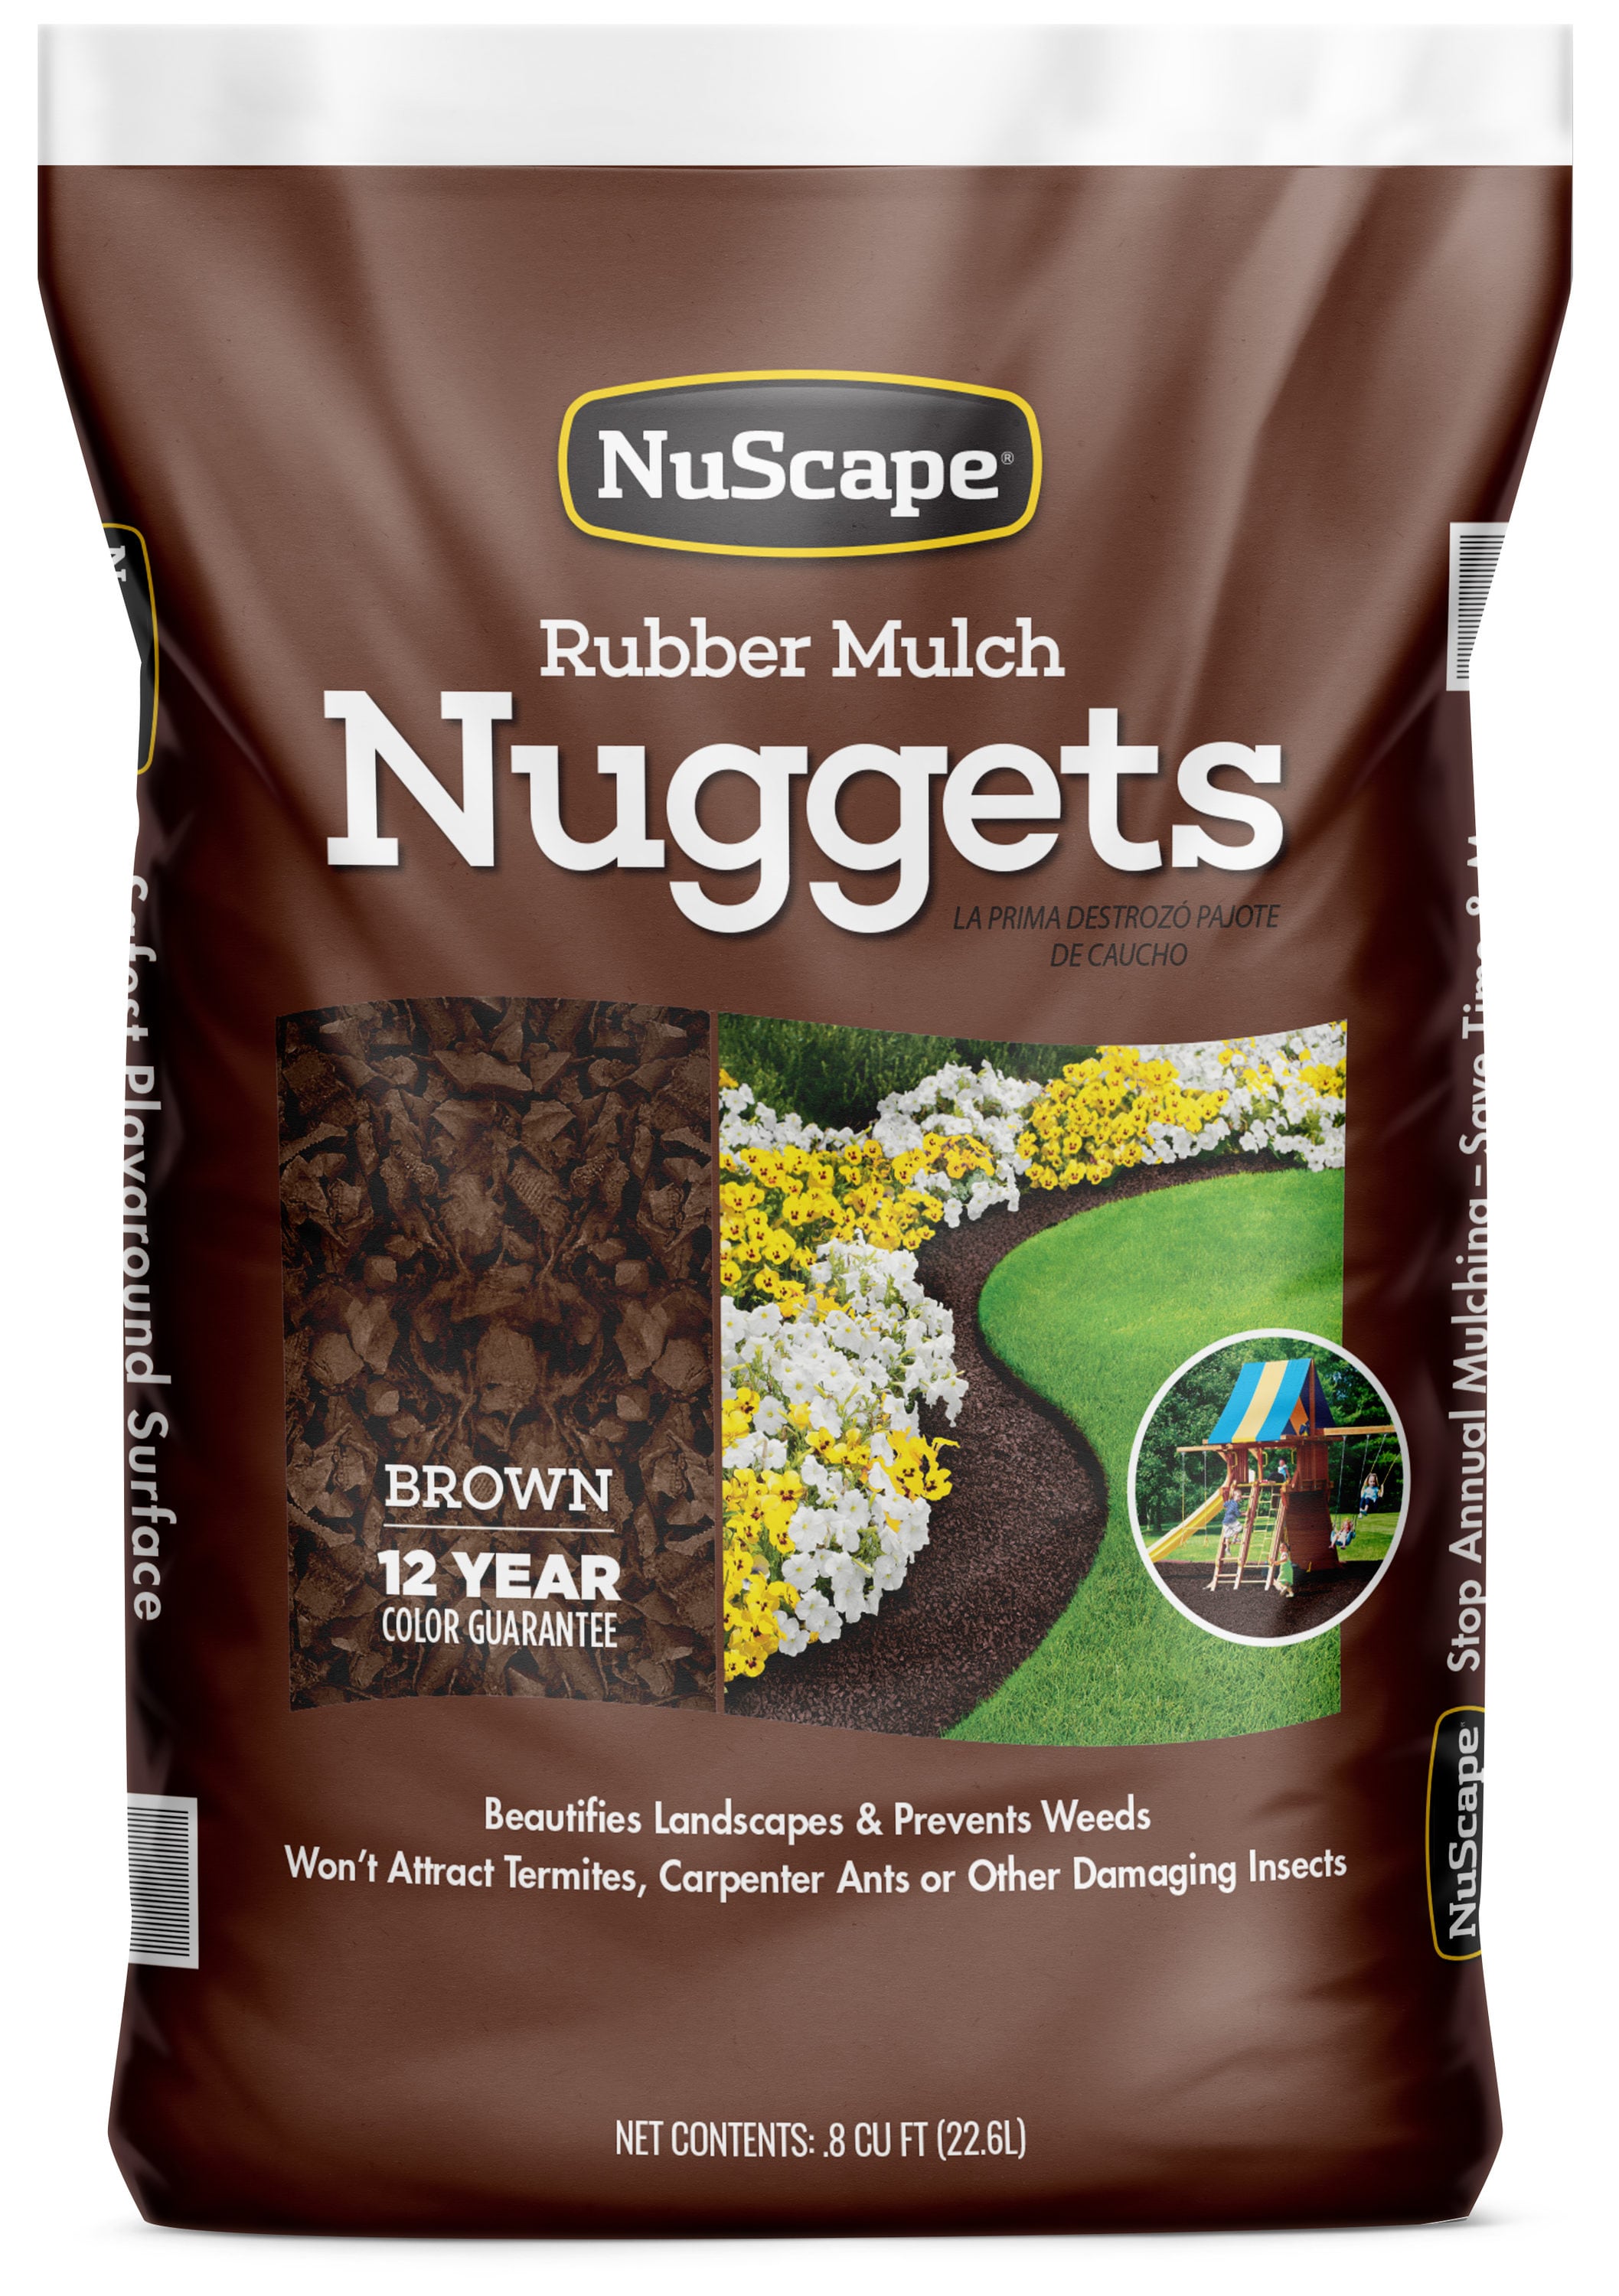 Share 84+ lowes bagged mulch latest esthdonghoadian